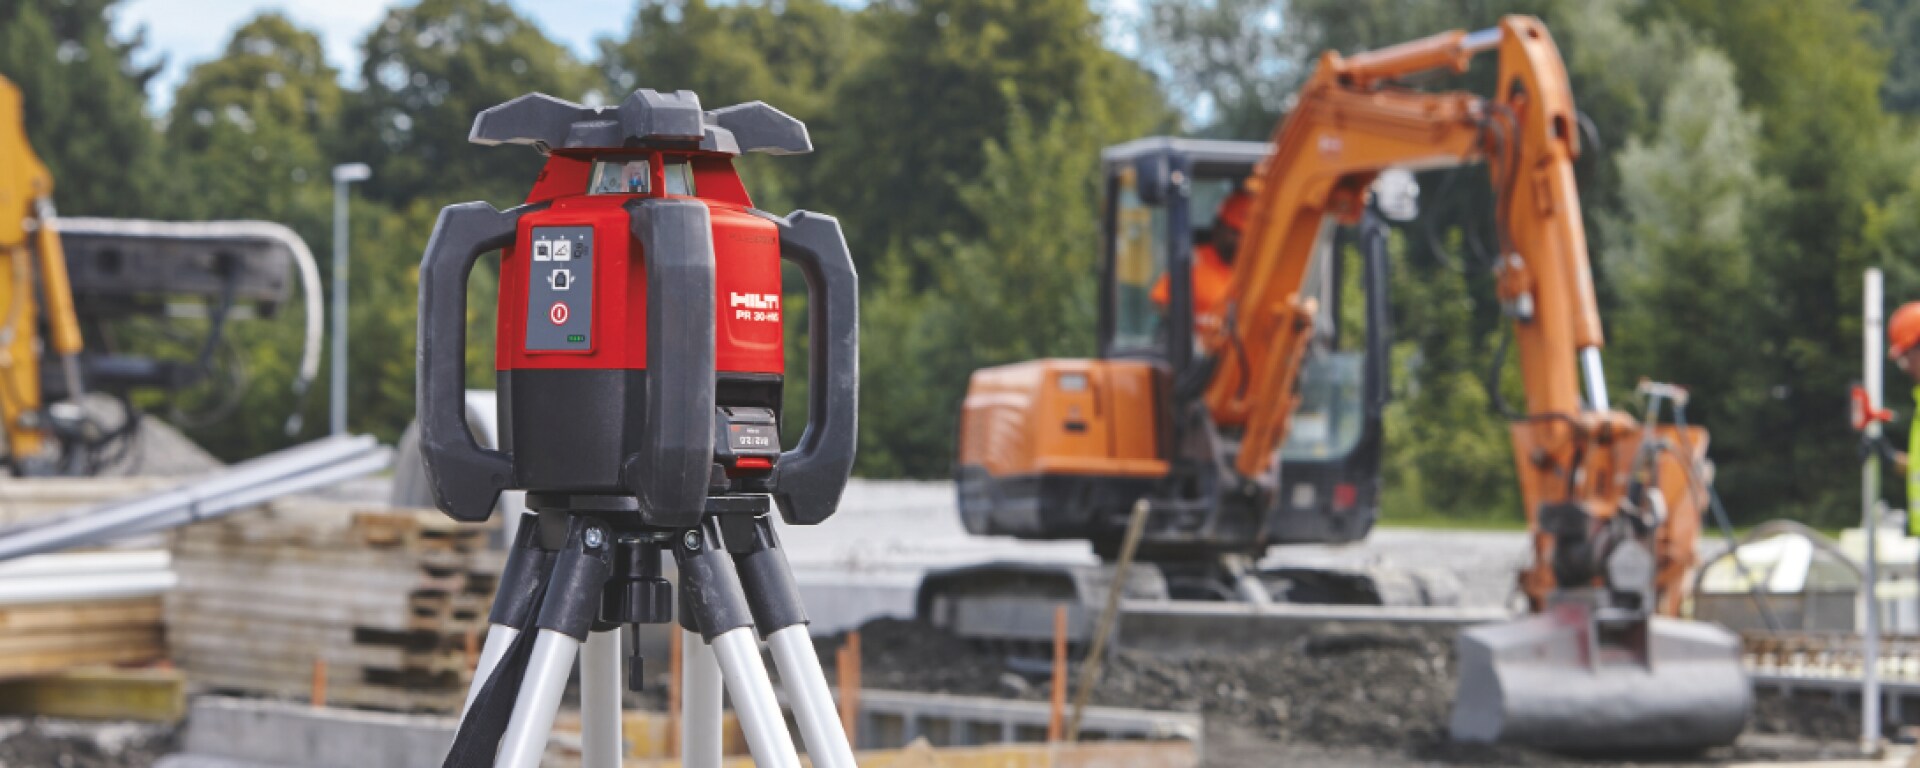 Using the TE 5-22 Cordless Rotary Hammer to secure formwork